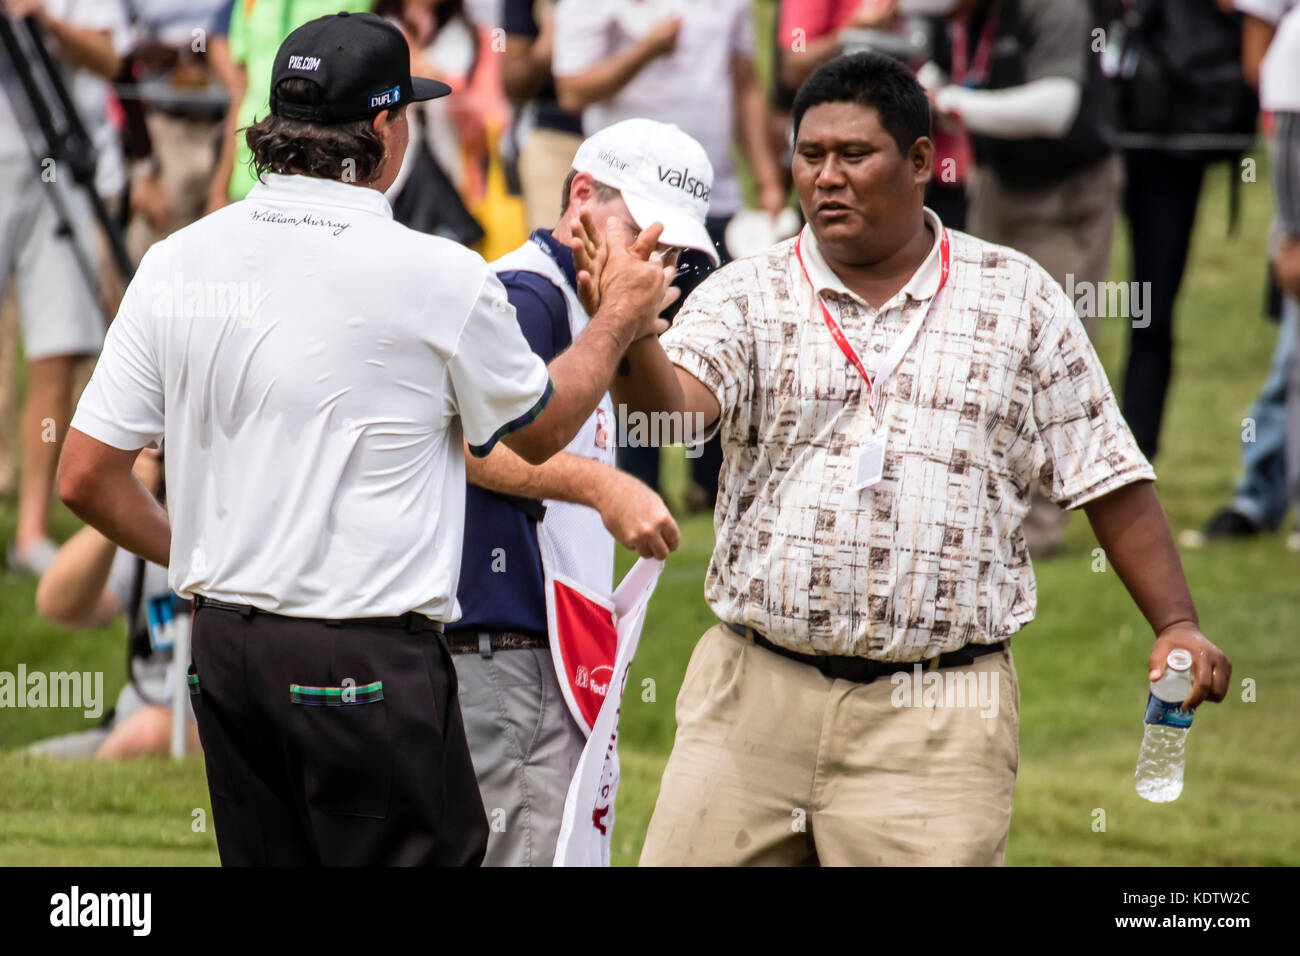 Kuala Lumpur, Malaysia. 15th October, 2017. USA Pat Perez wins the PGA CIMB Classic 2017 in Kuala Lumpur, Malaysia. Perez and his caddy was surprised with cold water dump on them at the 18th green for Perez PGA Tour winning. © Danny Chan/Alamy Live News. Stock Photo